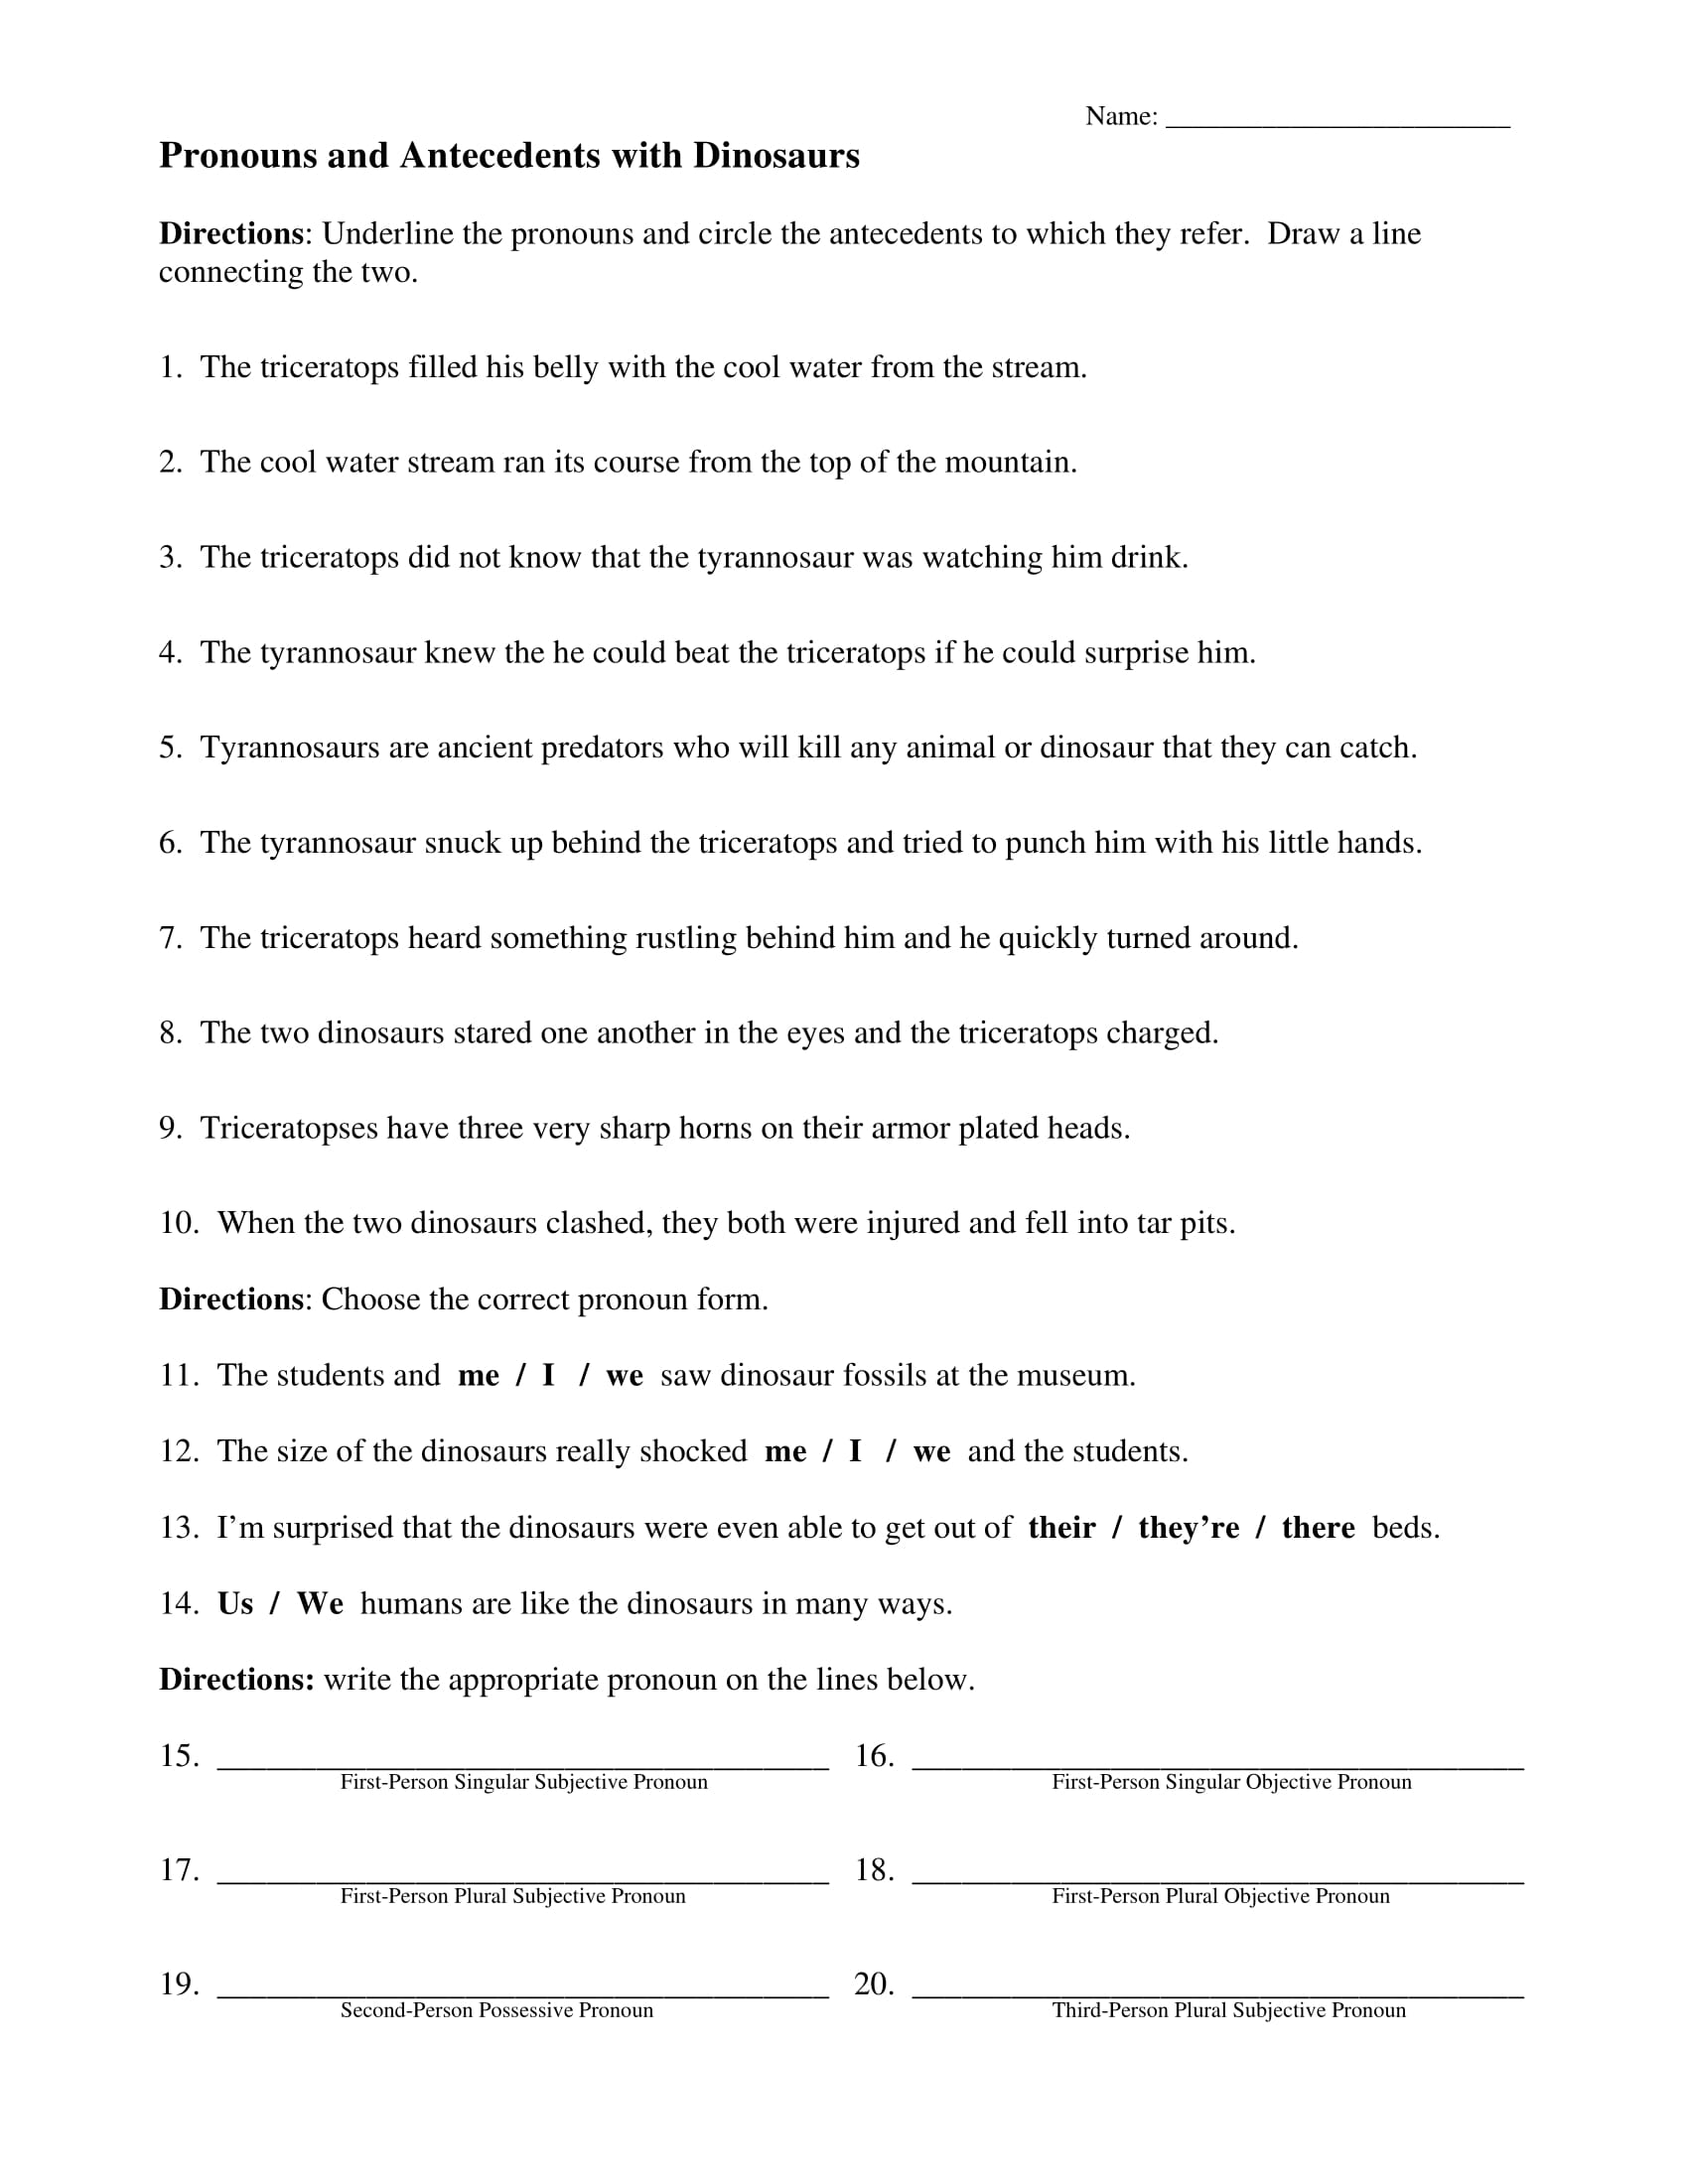 pronouns and antecedents exercise sheet example